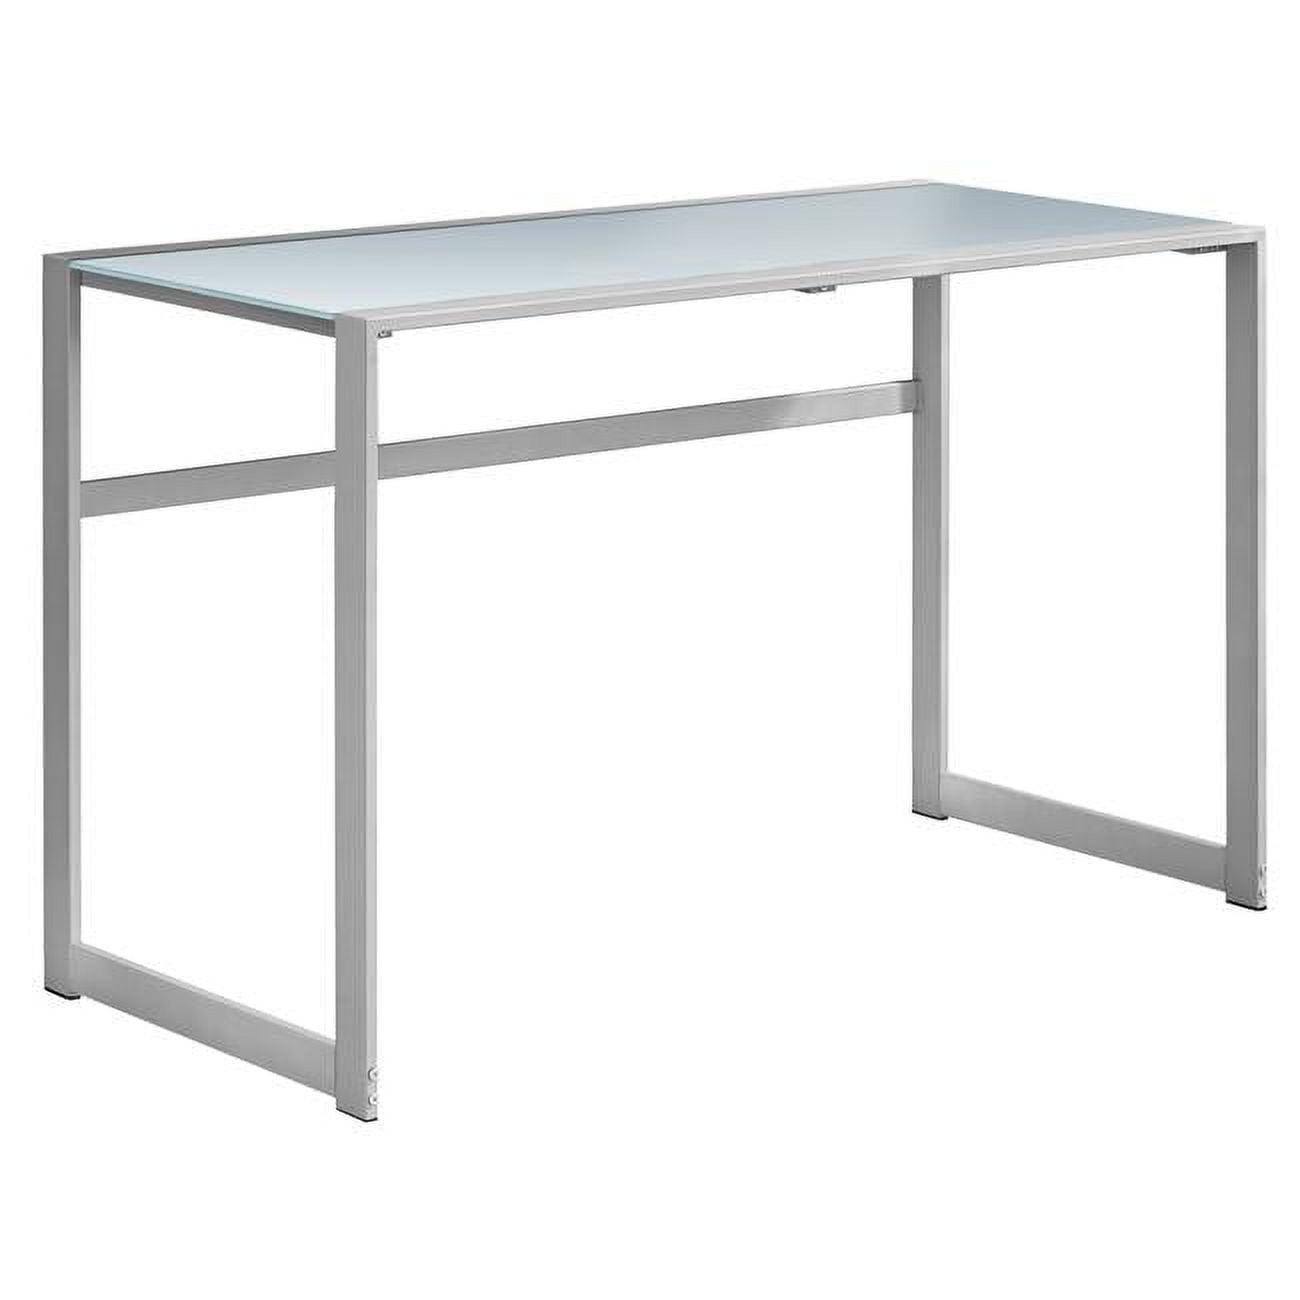 48" Frosted White Glass Home Office Desk with Silver Metal Frame and Drawer